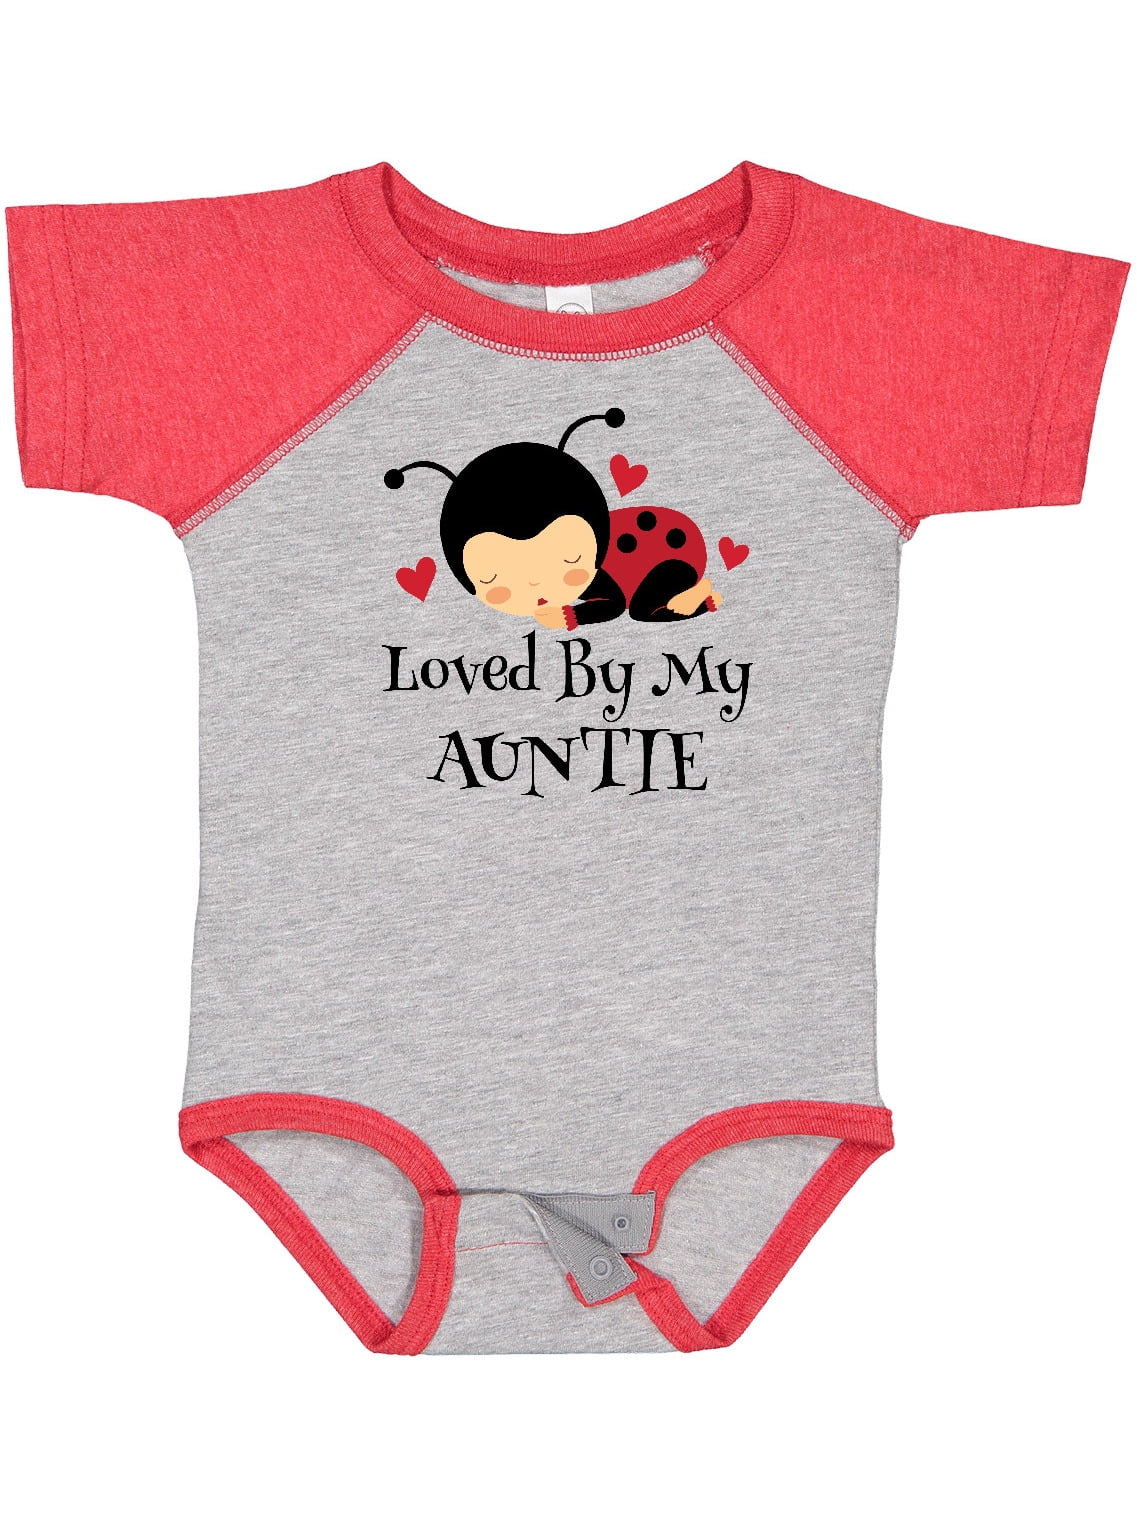 Lady Bug Outfit Lady Bug Shirt 1st Mother's Lady Bug Bodysuit Mommy's Little Love Bug Baby Shorts Outfit Ladybug Outfit New Mom Gift